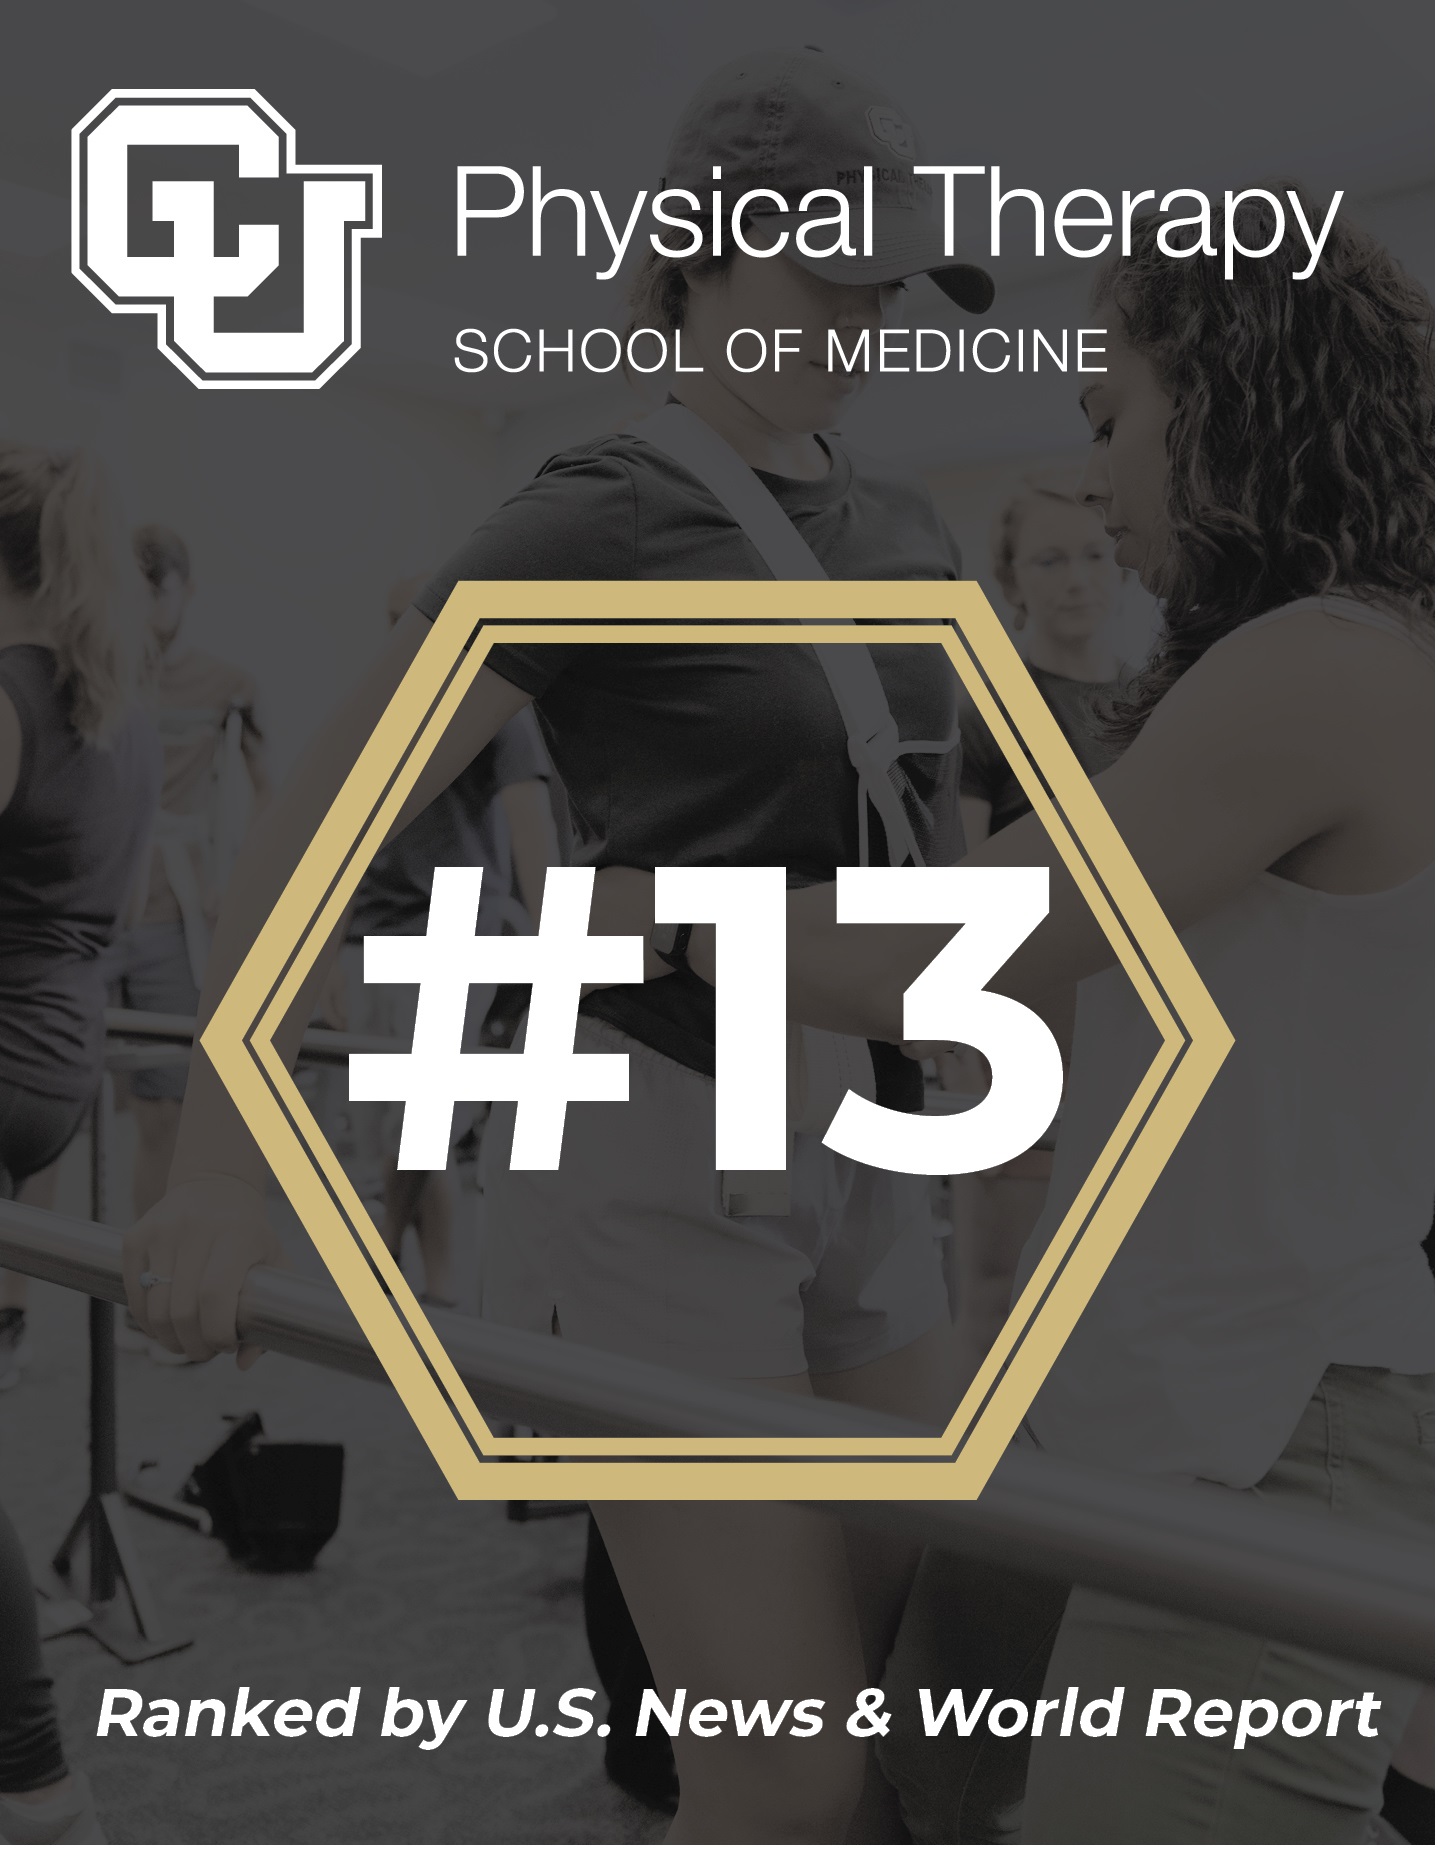 CU Physical Therapy, School of Medicine